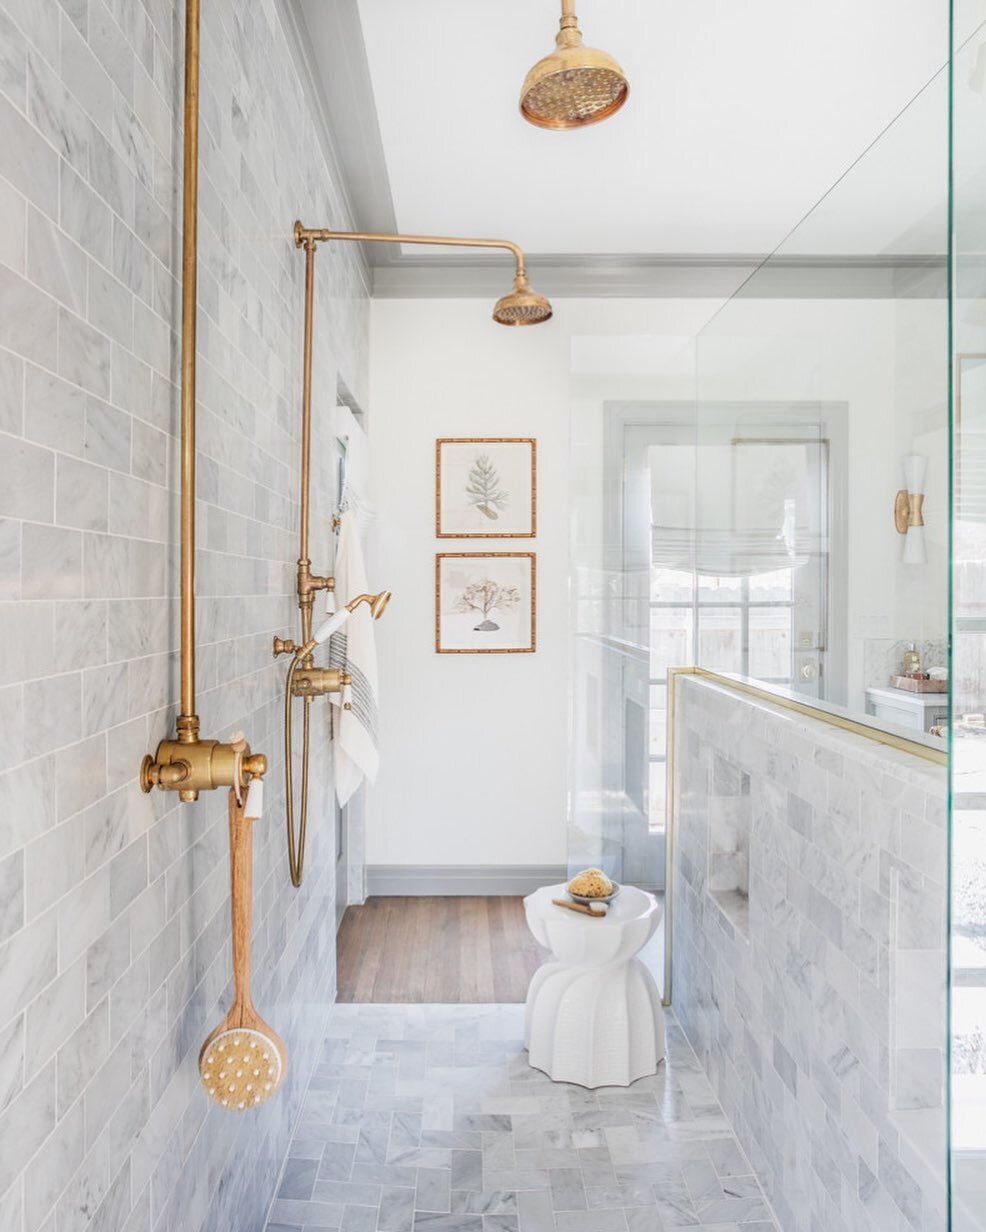 What a week it has been!  Subzero temperatures and snow...it is beautiful but praying everyone's pipes will thaw without bursting! In the meantime, enjoy a hot shower while you can! 
Design: @browninteriorsinc  Photo: @emilyhartphoto 
*
*
*
*
#browni